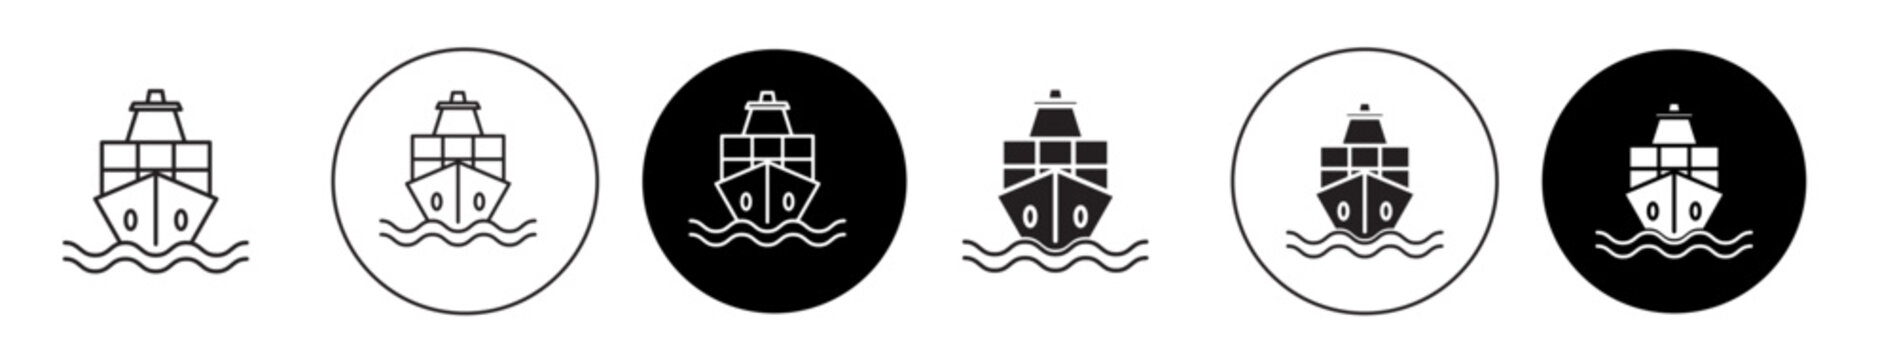 cargo ship icon set. marine container cargo vessel vector symbol in black filled and outlined style.